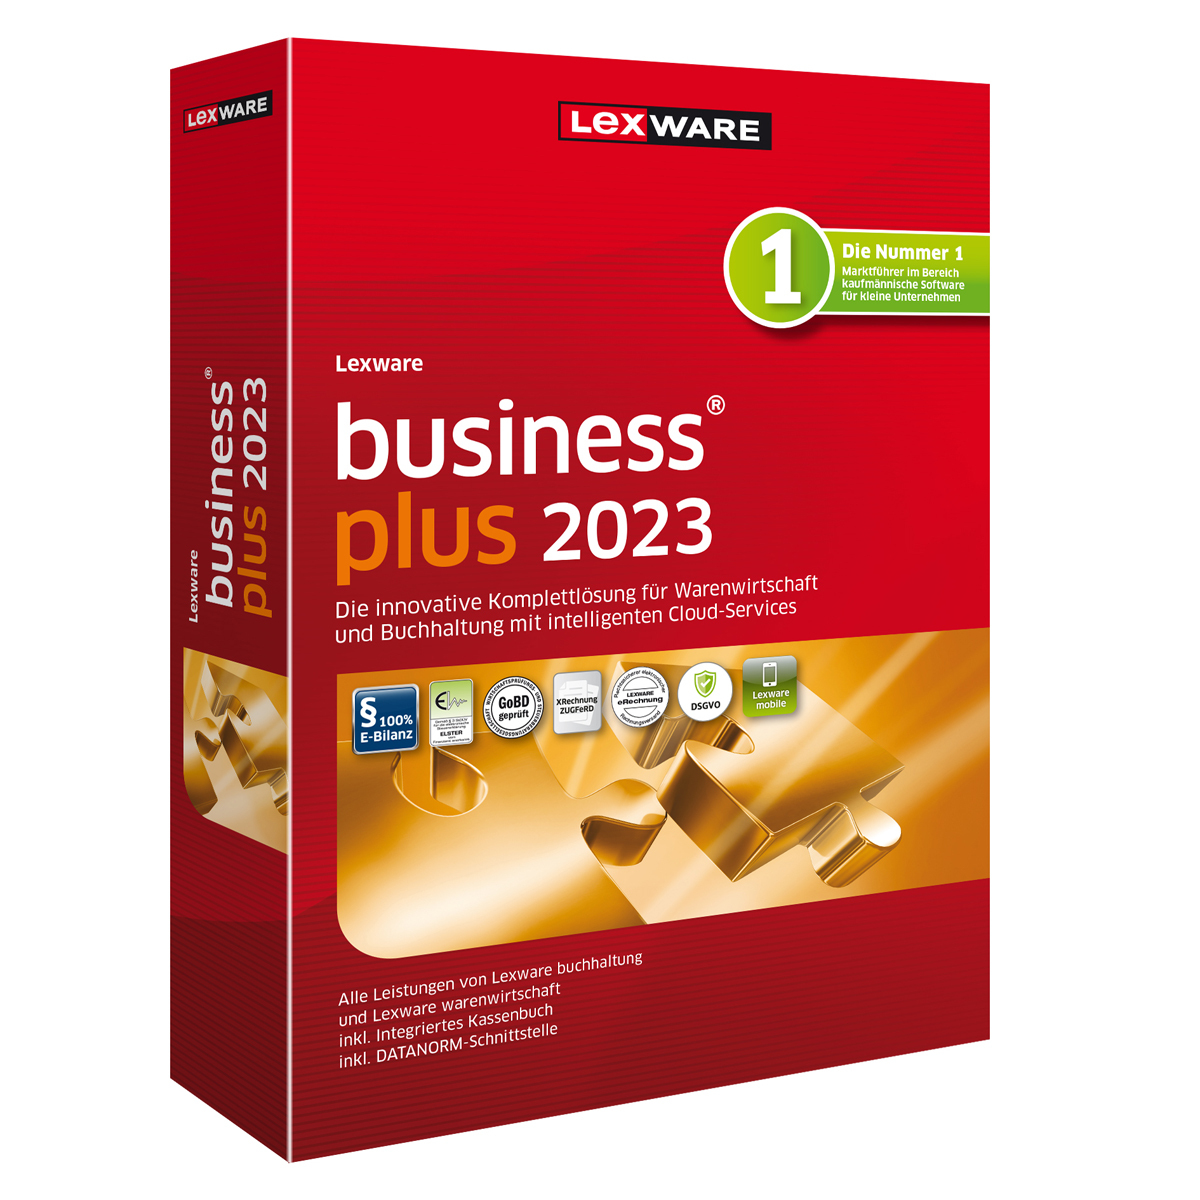 LEXWARE business plus 2023 ABO Download